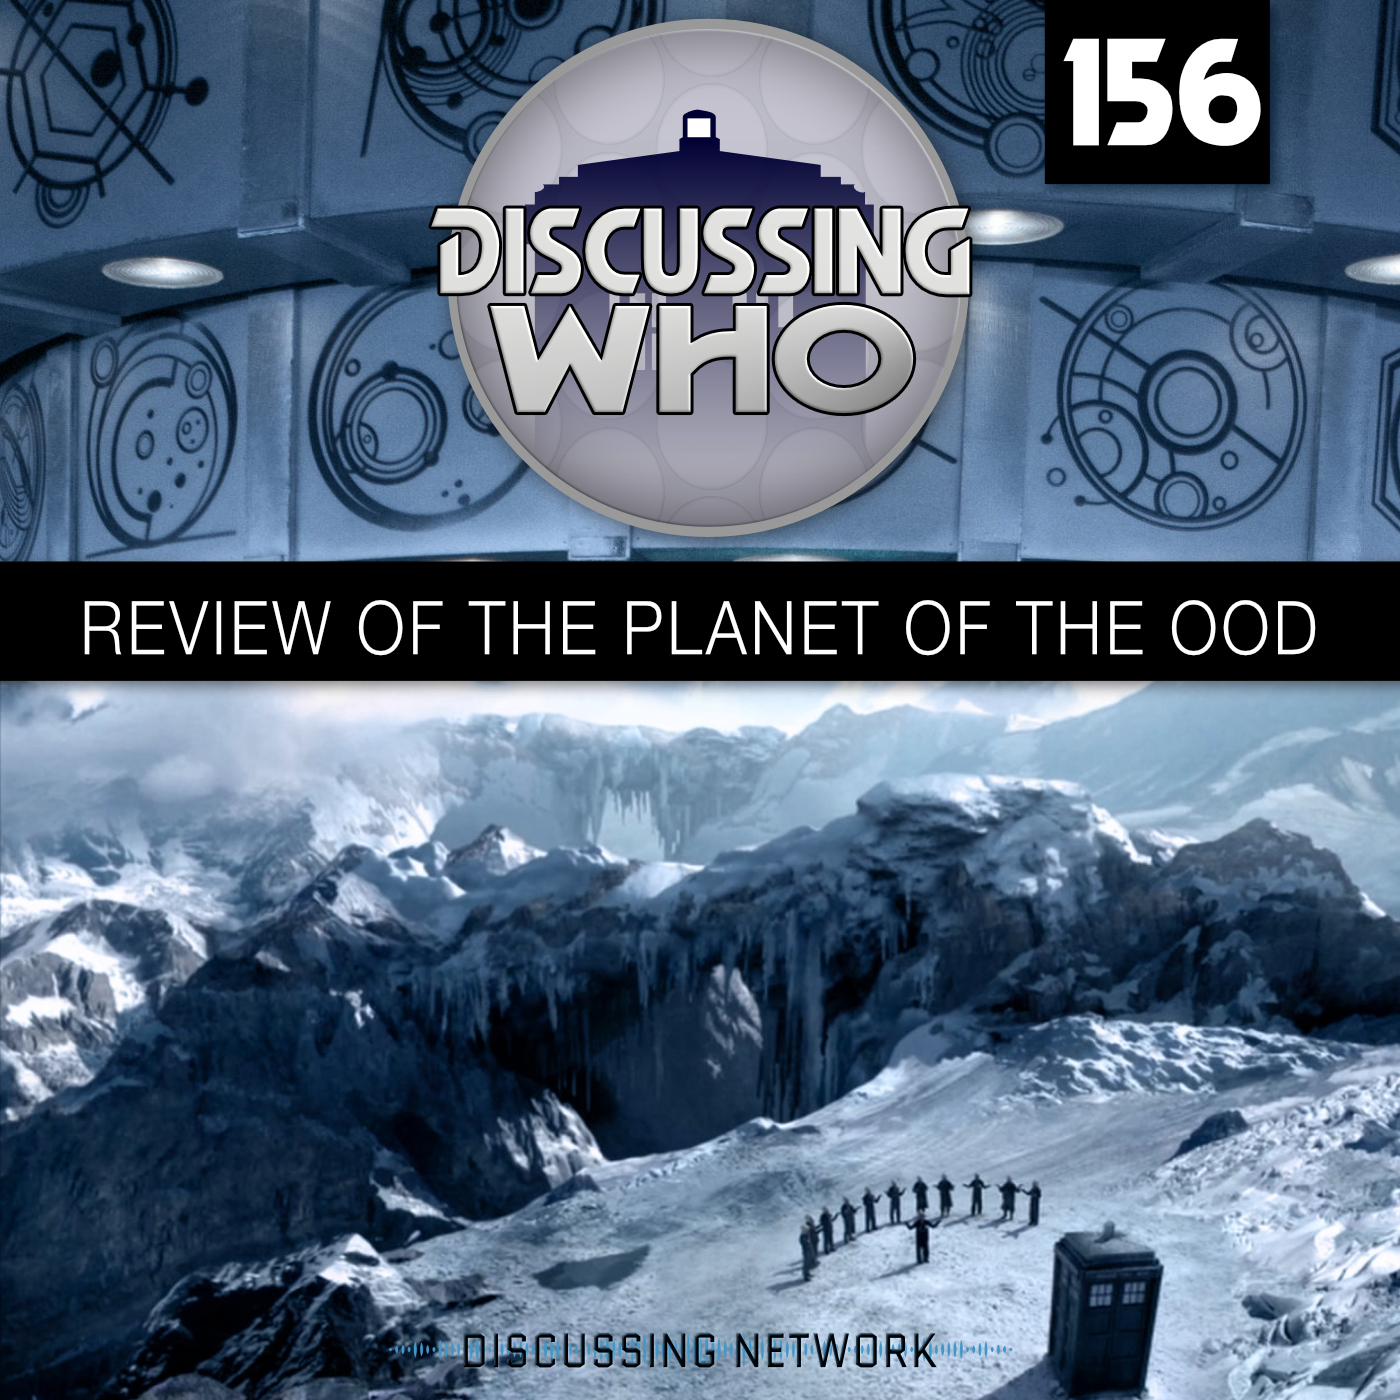 Doctor Who Planet of the Ood